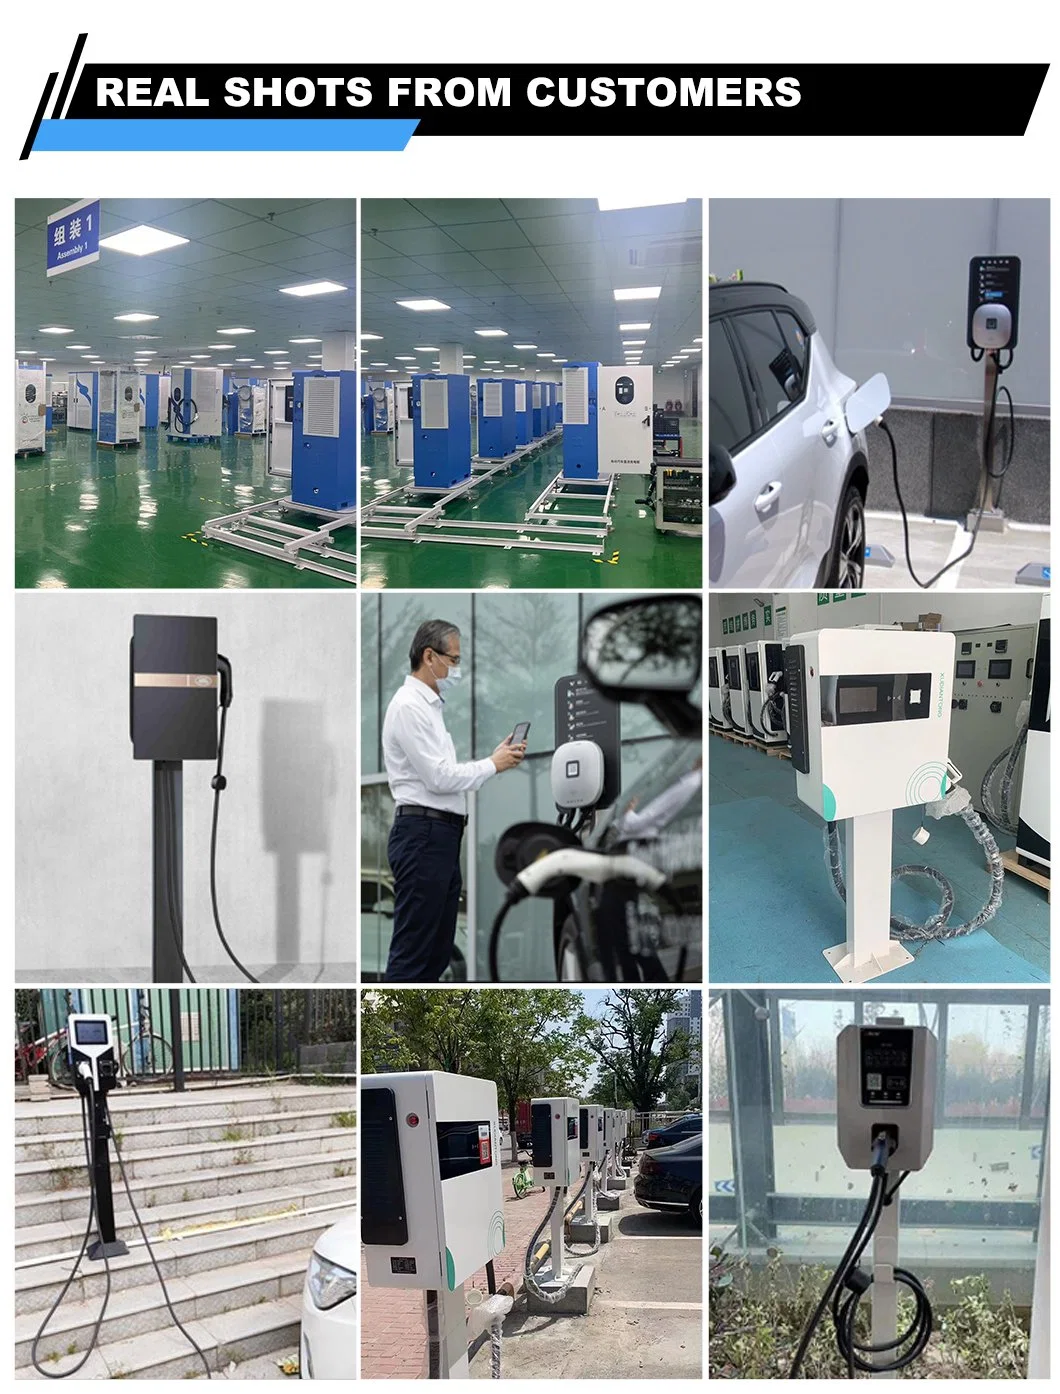 China Factory Directly Supply Ocpp 1.6j Type1 Type2 Floor-Mounted Charging Stations 16A 32A 3.7kw 7kw 11kw 20kw 22kw 40kw Dual Gun Portable EV Charger